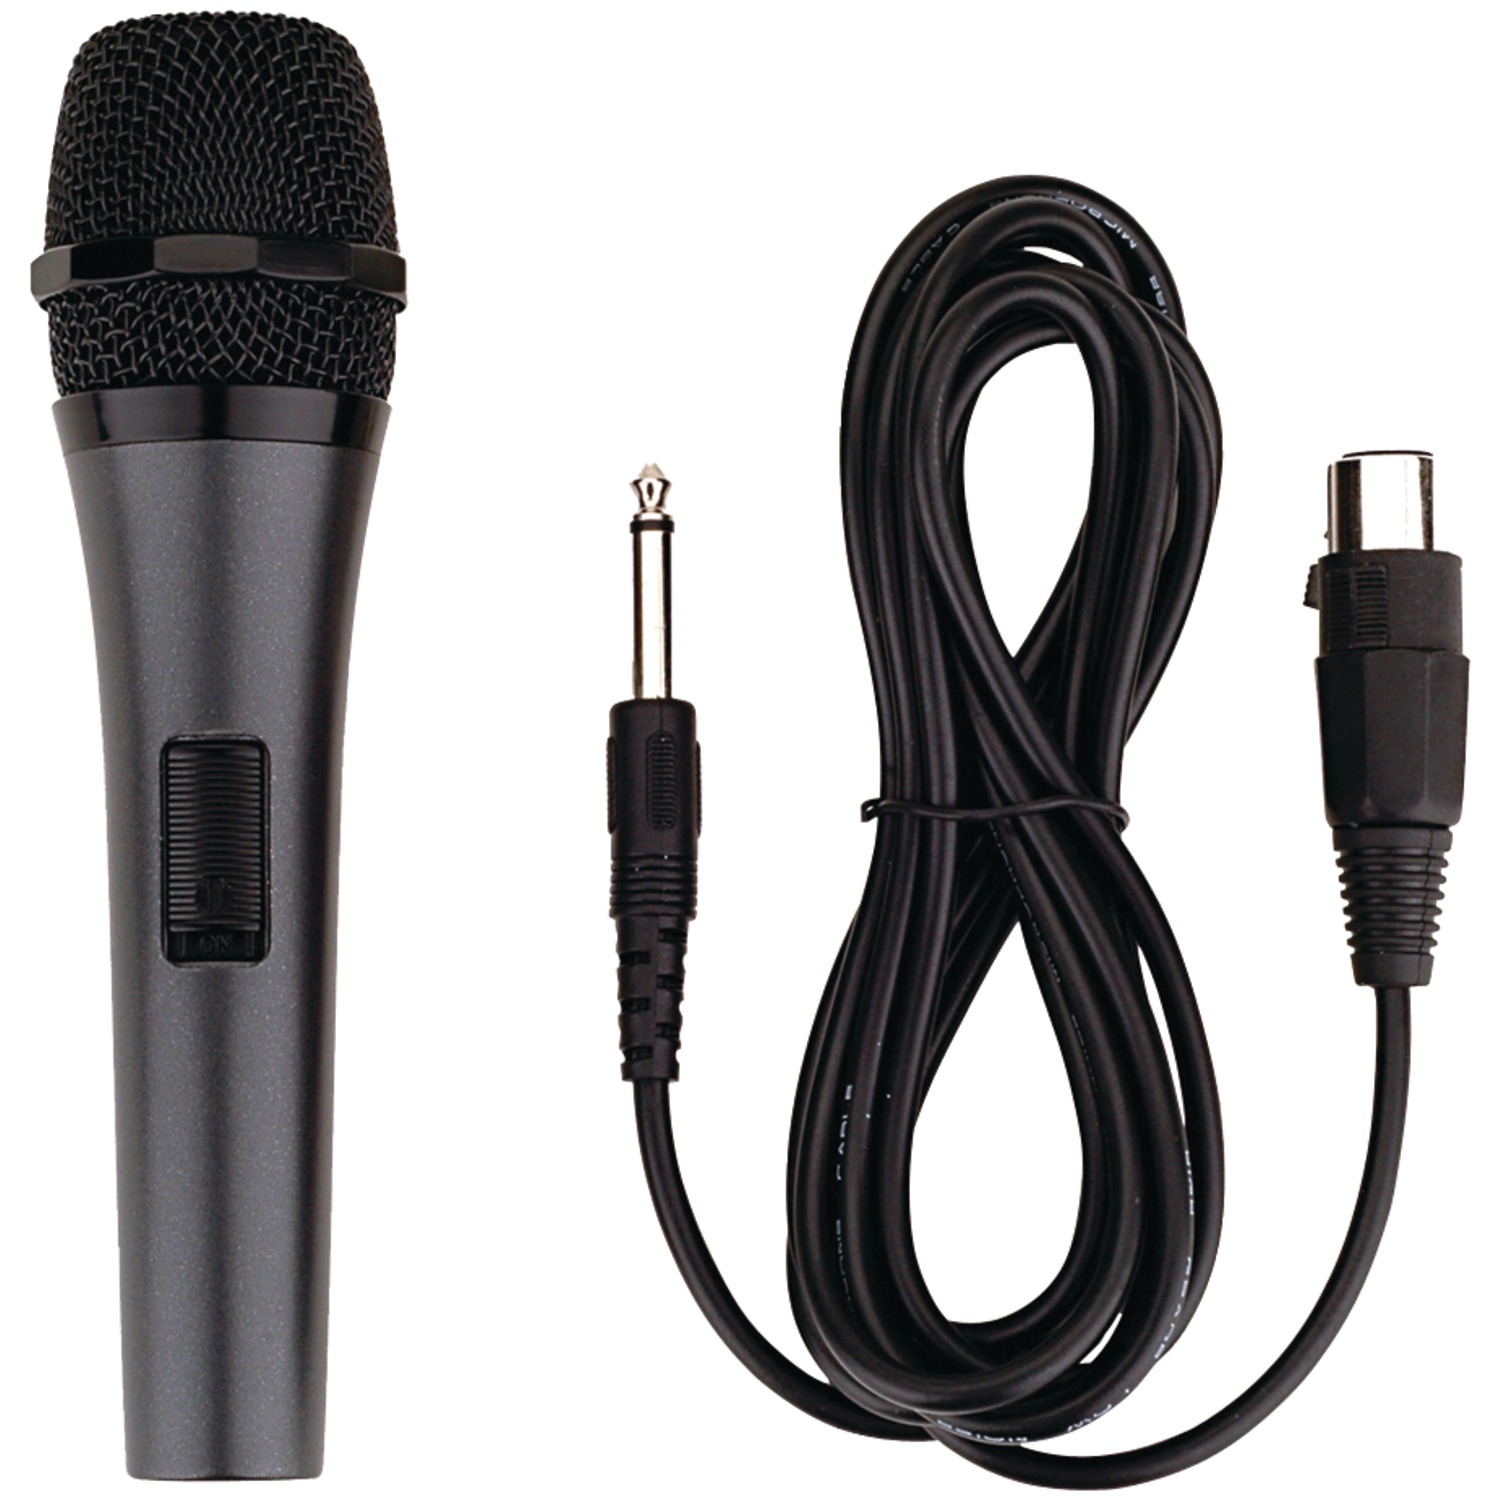 DOK Solutions - Emerson Professional Dynamic Microphone with Detachable Cord - image 1 of 3